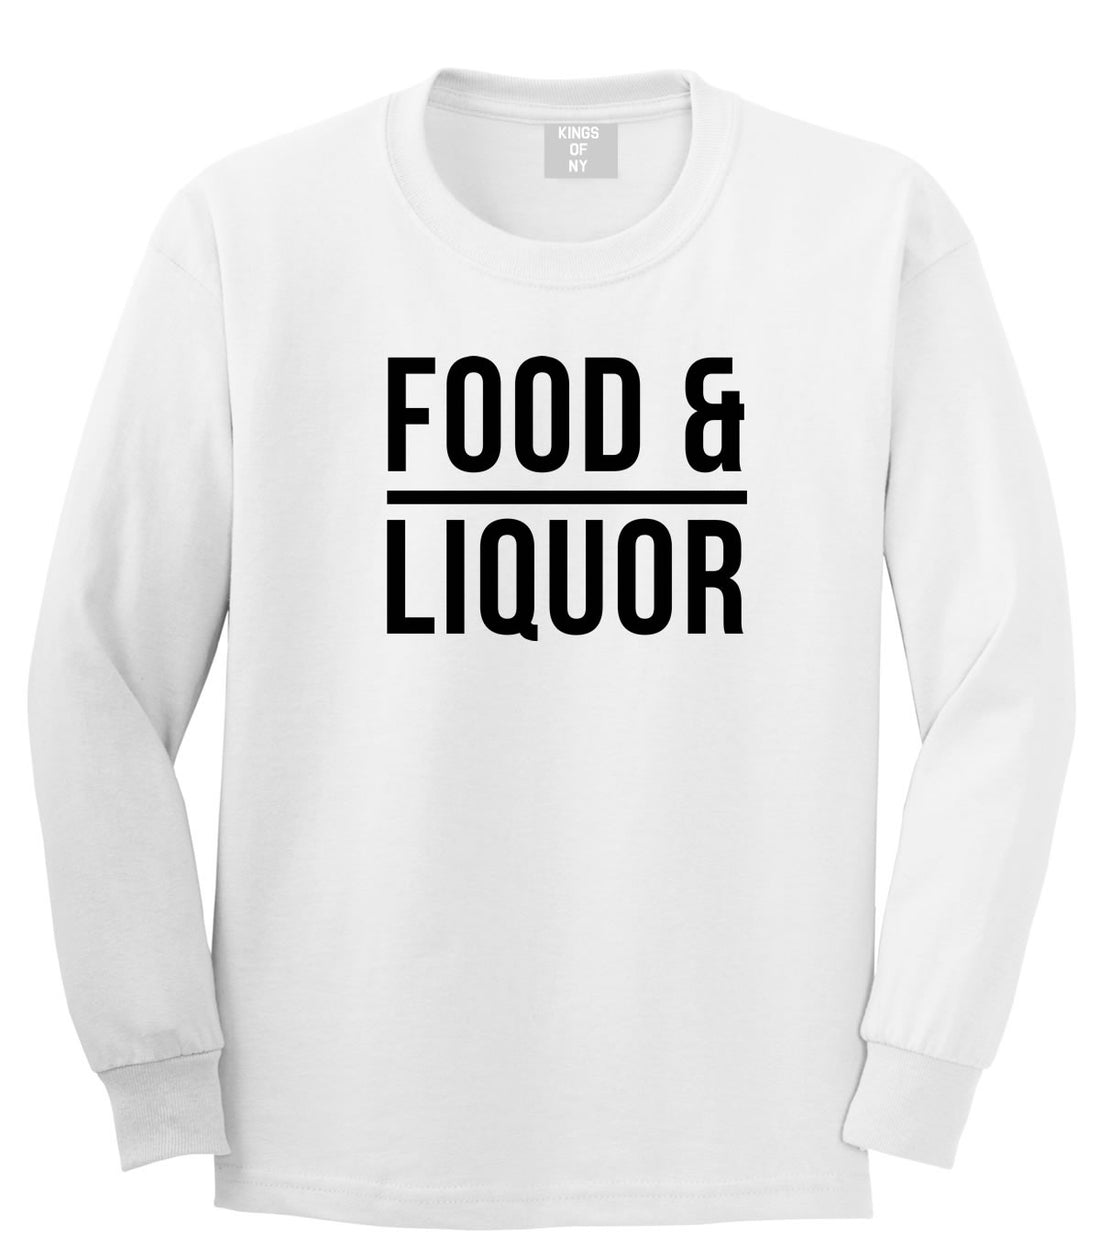 Food And Liquor Long Sleeve T-Shirt in White By Kings Of NY